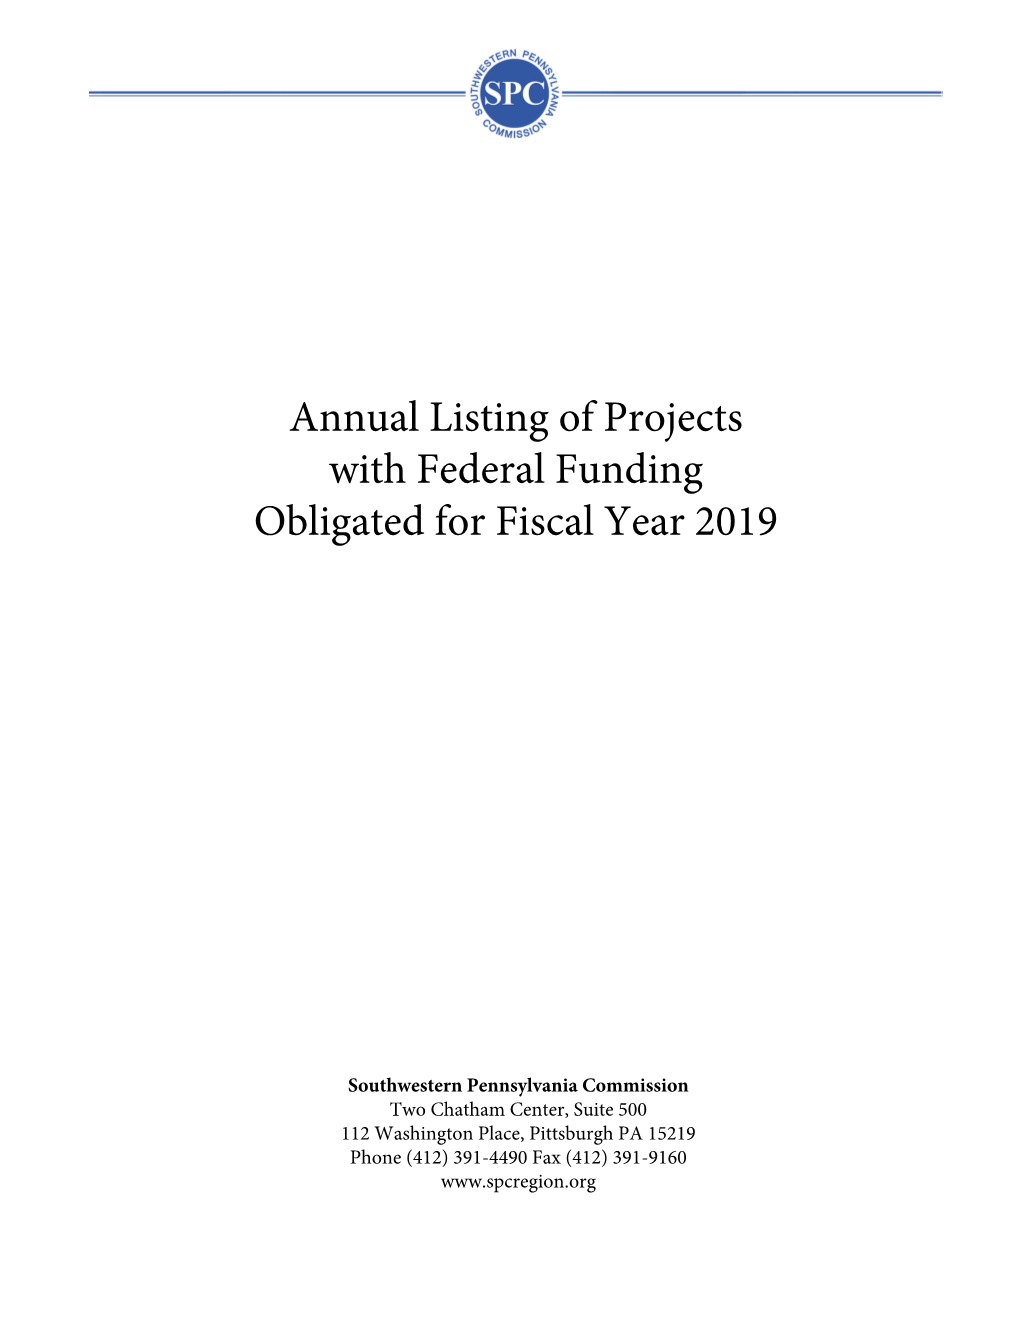 Annual Listing of Highway Projects with Federal Funding Obligated for FY 2019